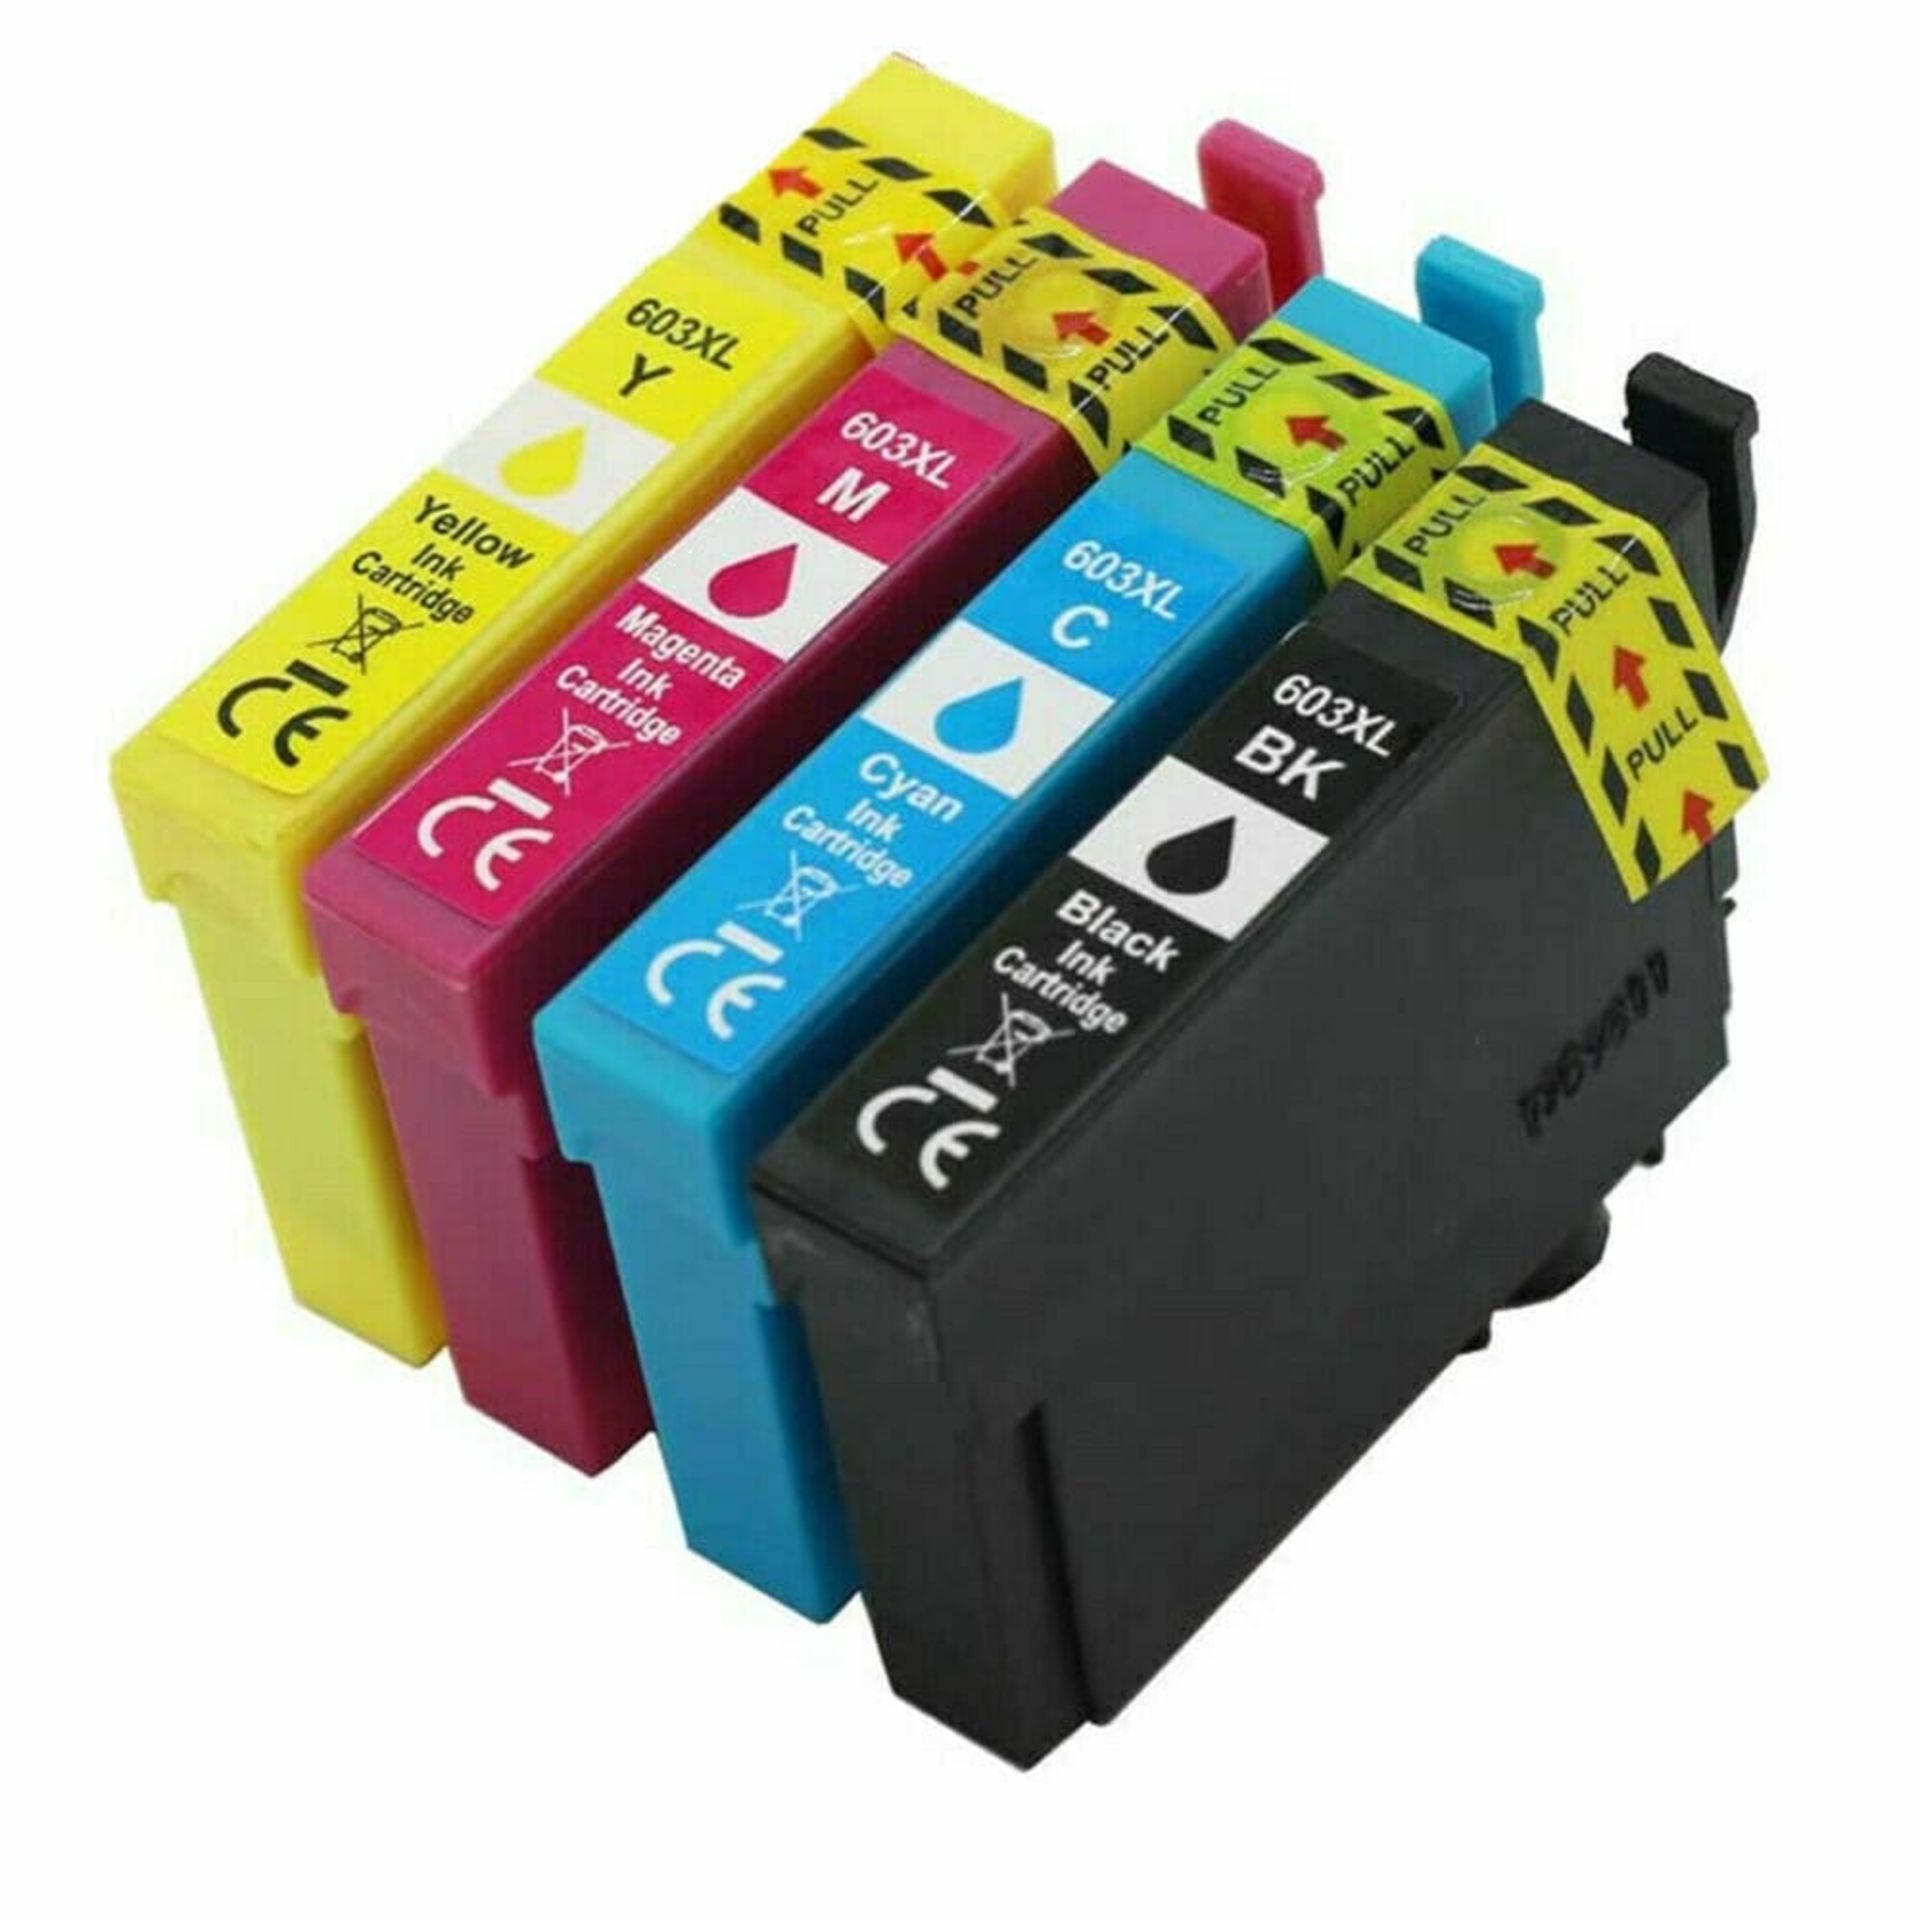 Brand new and Sealed 100x 603XL Remanufactured ink cartridges - Total RRP £2,399